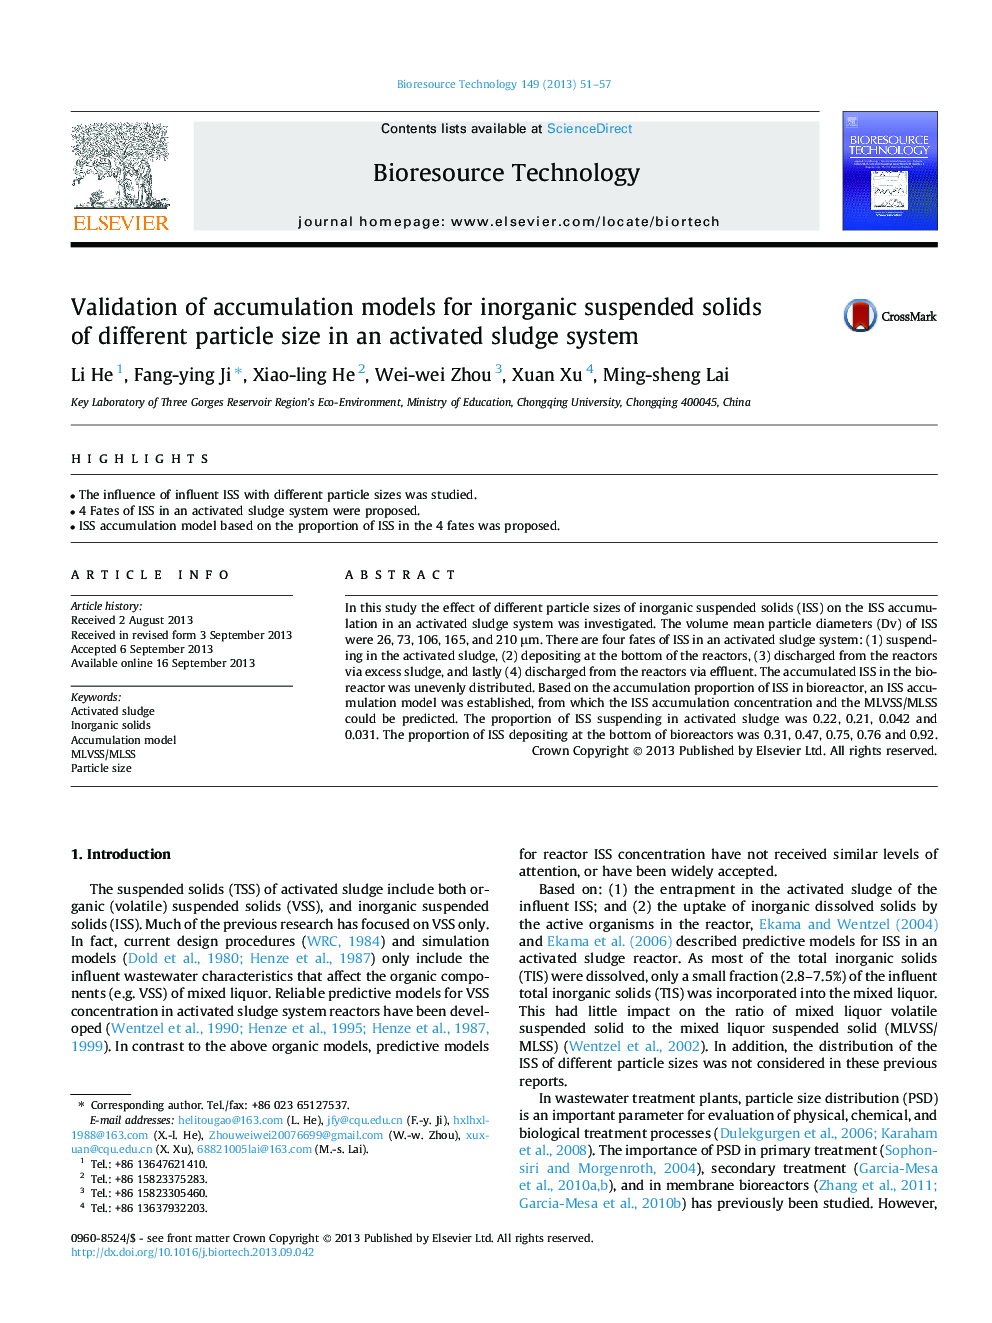 Validation of accumulation models for inorganic suspended solids of different particle size in an activated sludge system